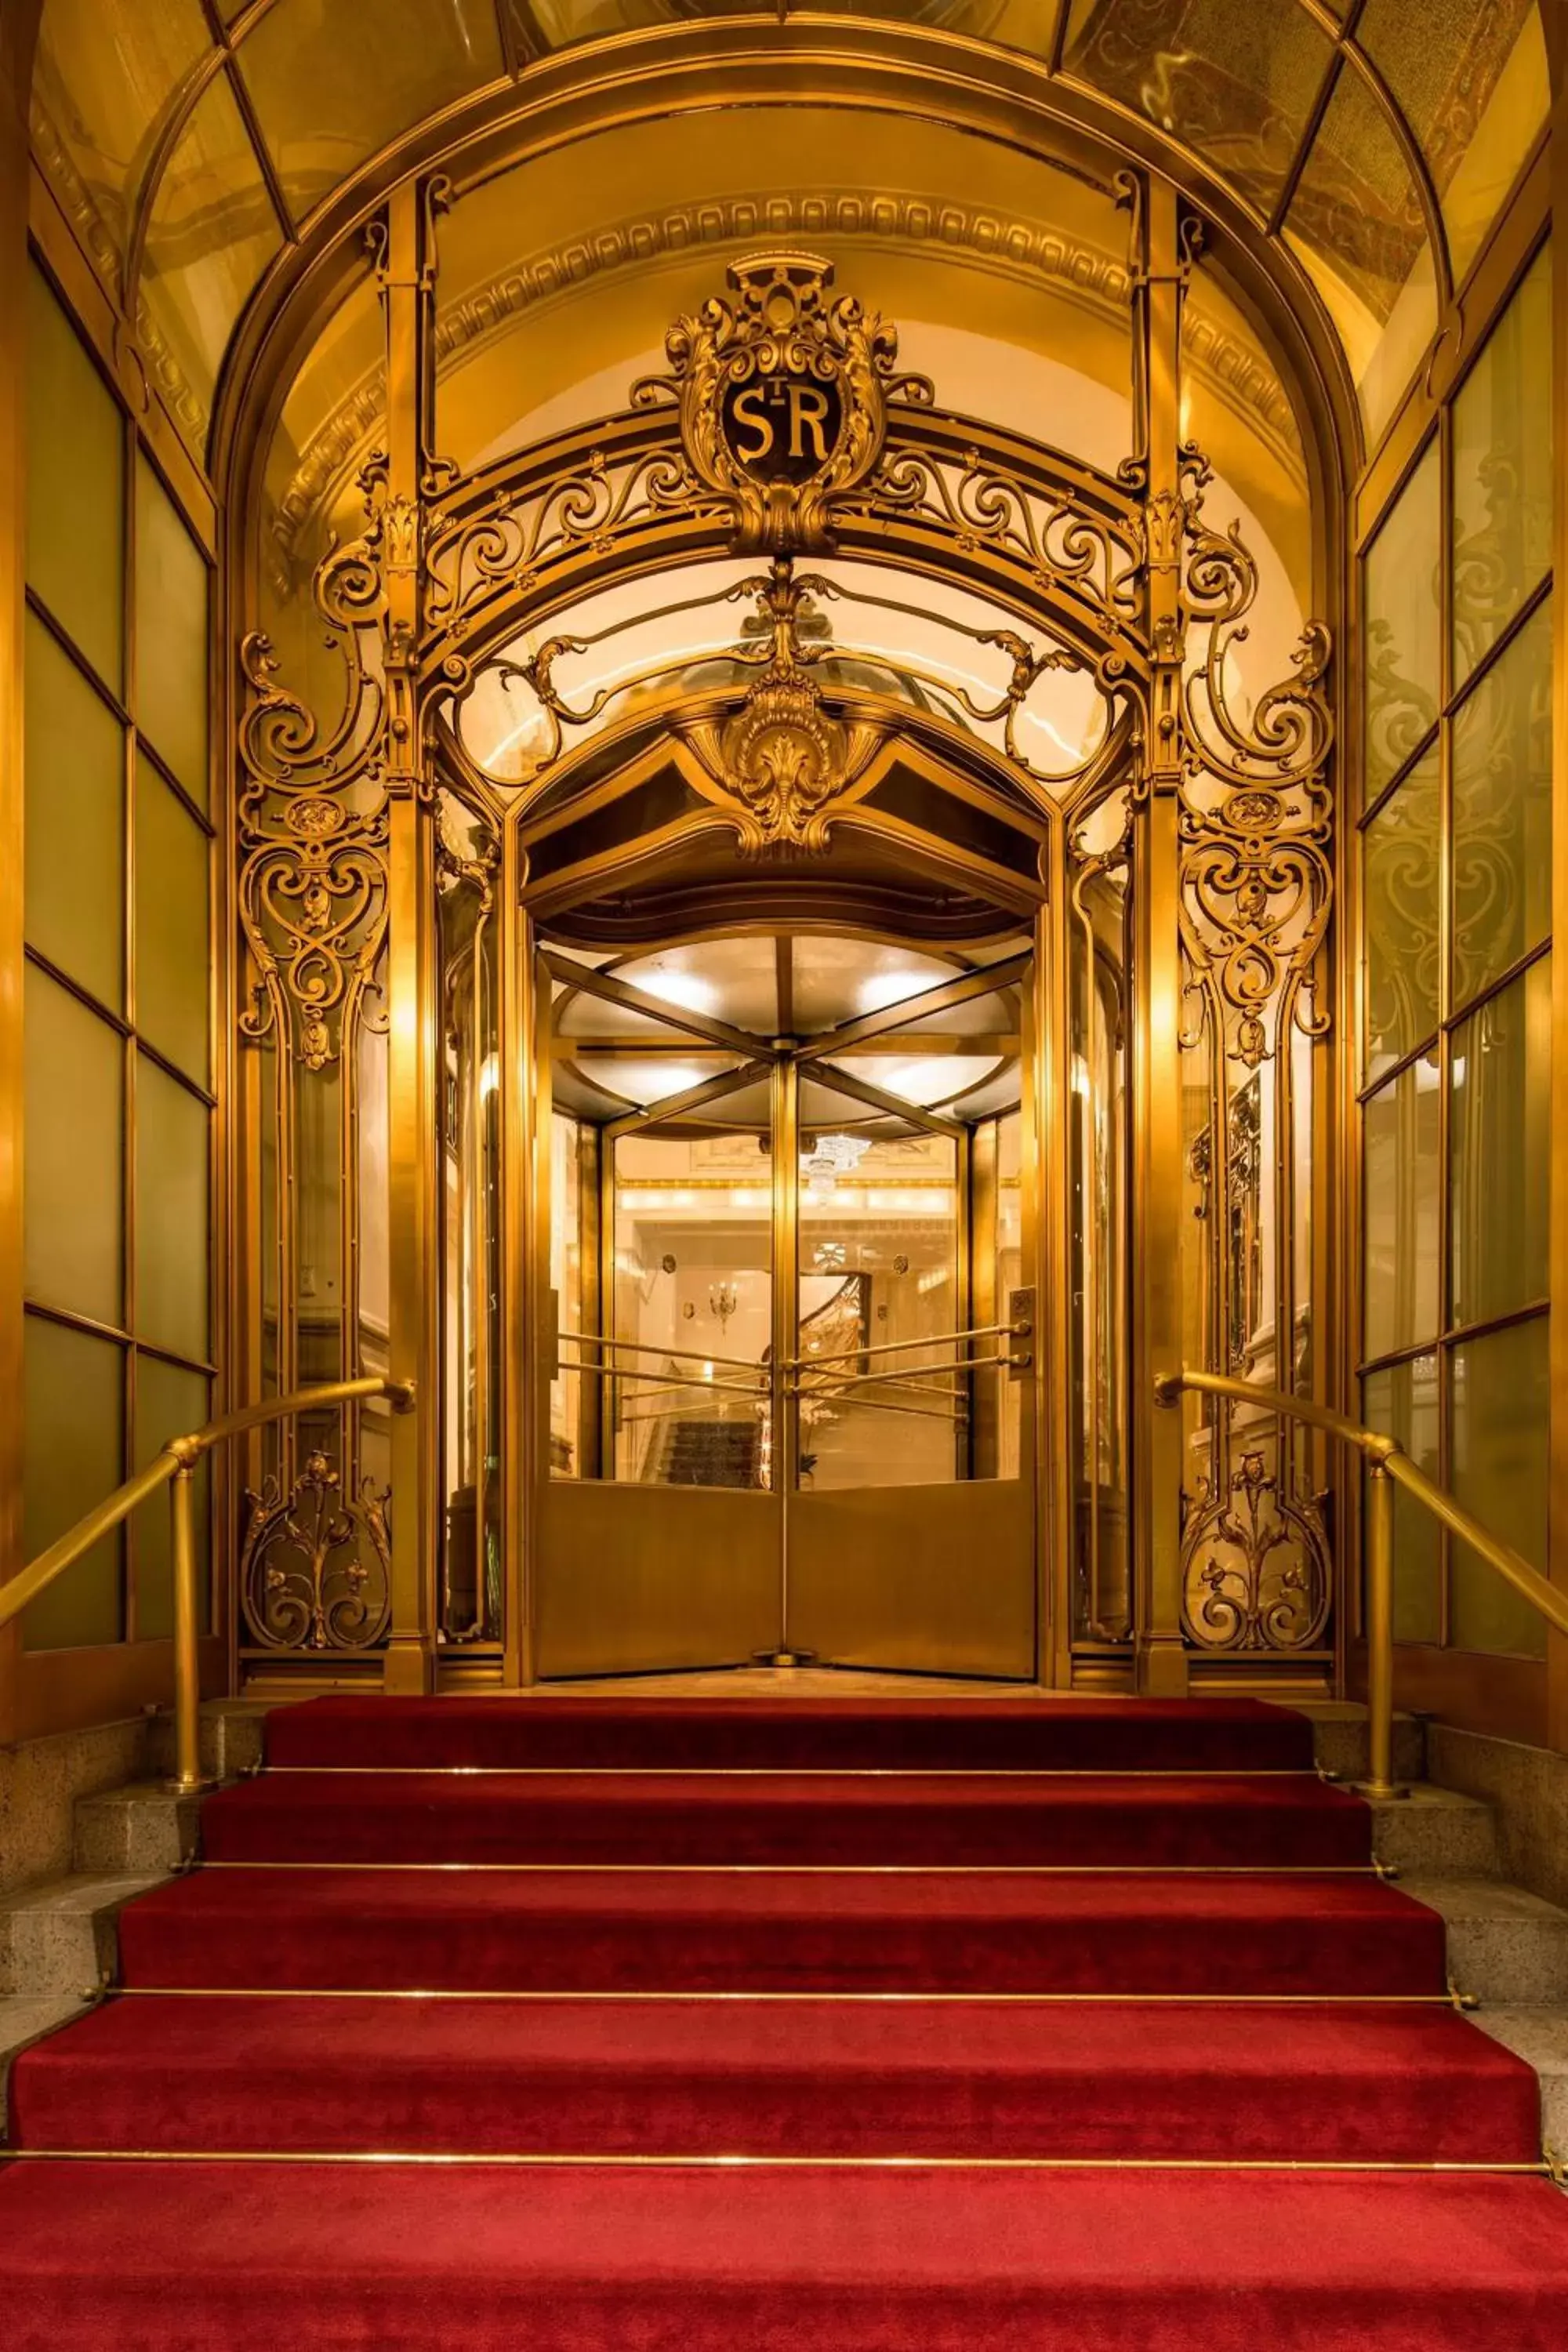 Property building in The St. Regis New York